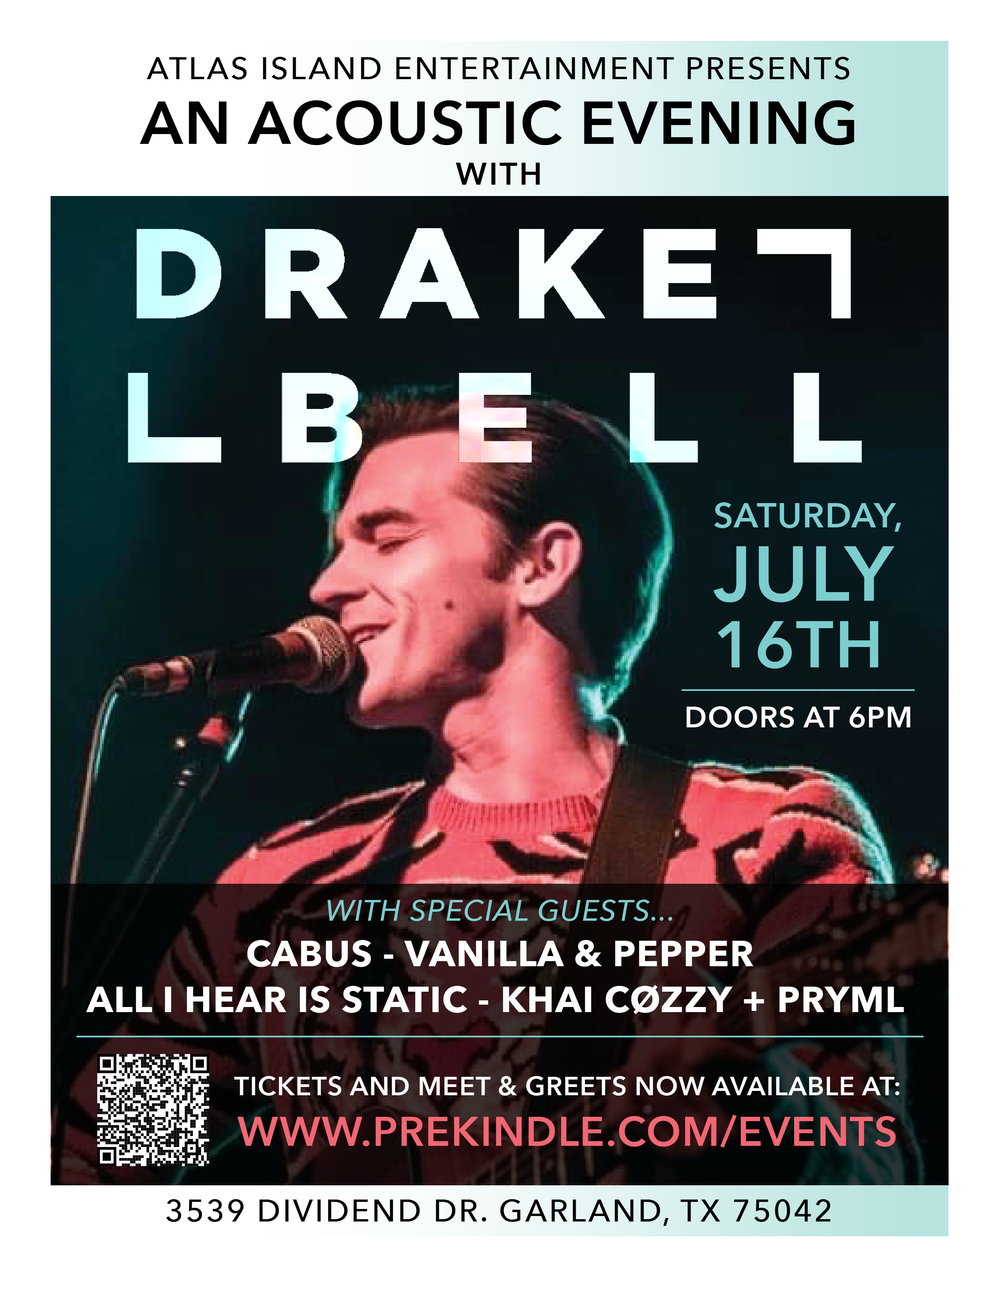 drake bell acoustic show